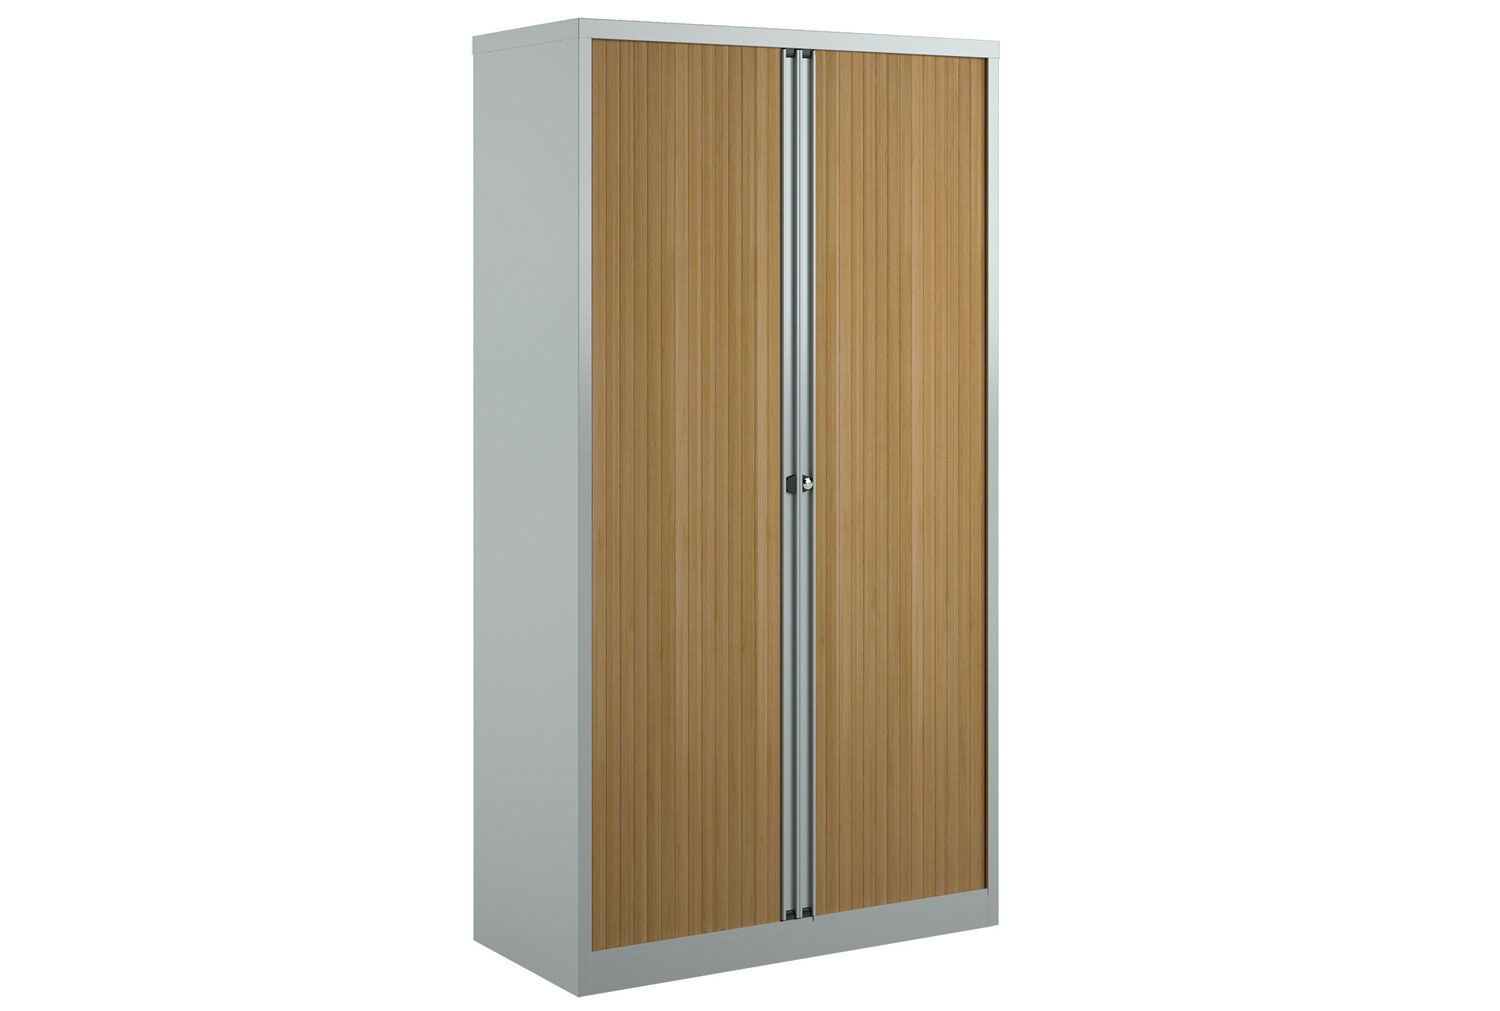 Economy Tambour Office Cupboards, 100wx47dx199h (cm), Silver / Beech, Fully Installed